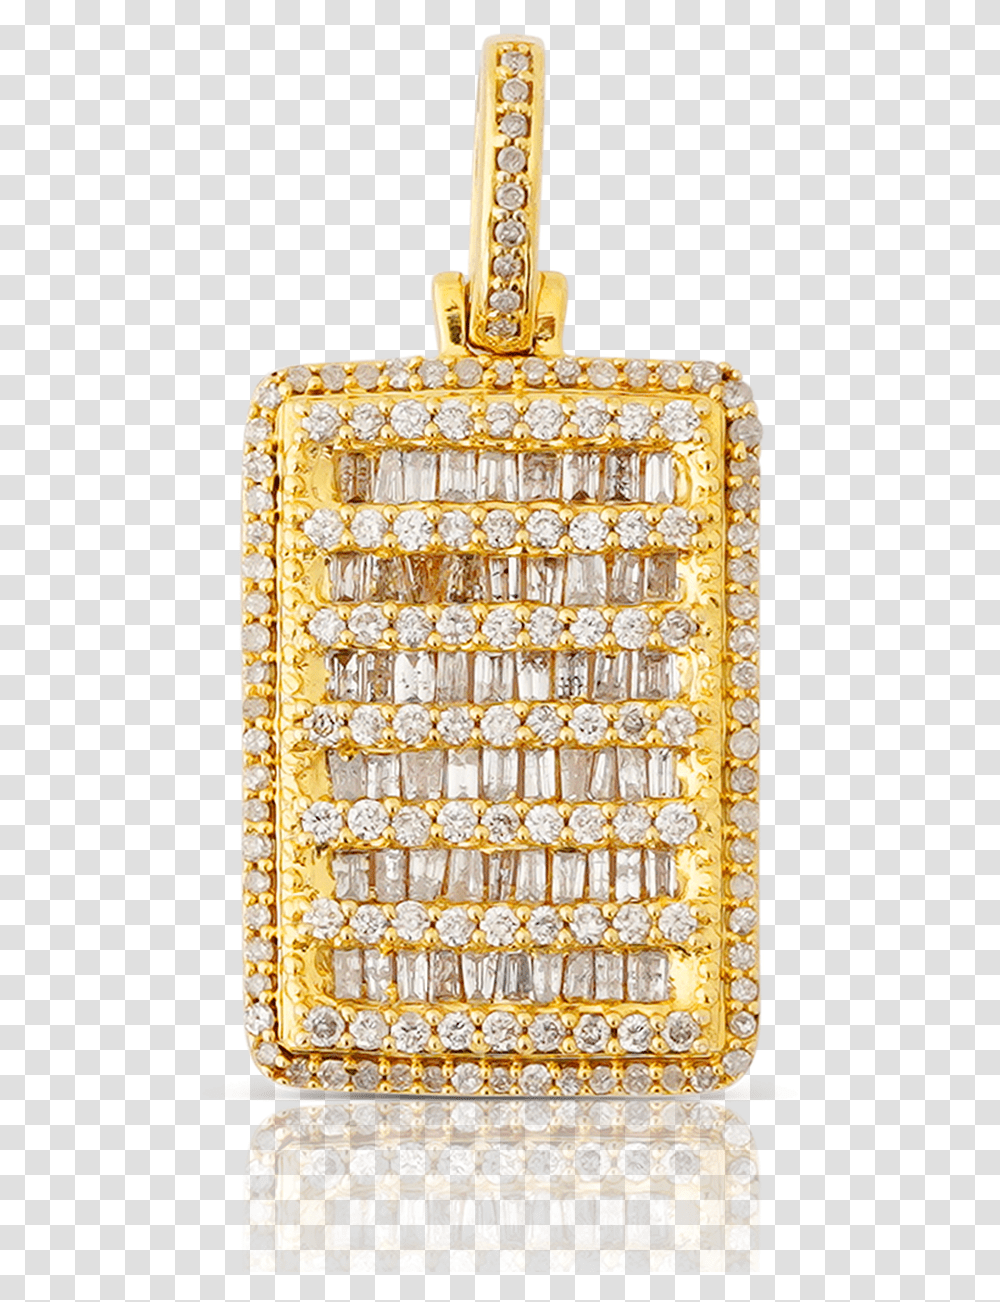 Yellow Gold Baguette Diamond Pendant Pendant, Sweets, Food, Confectionery, Accessories Transparent Png